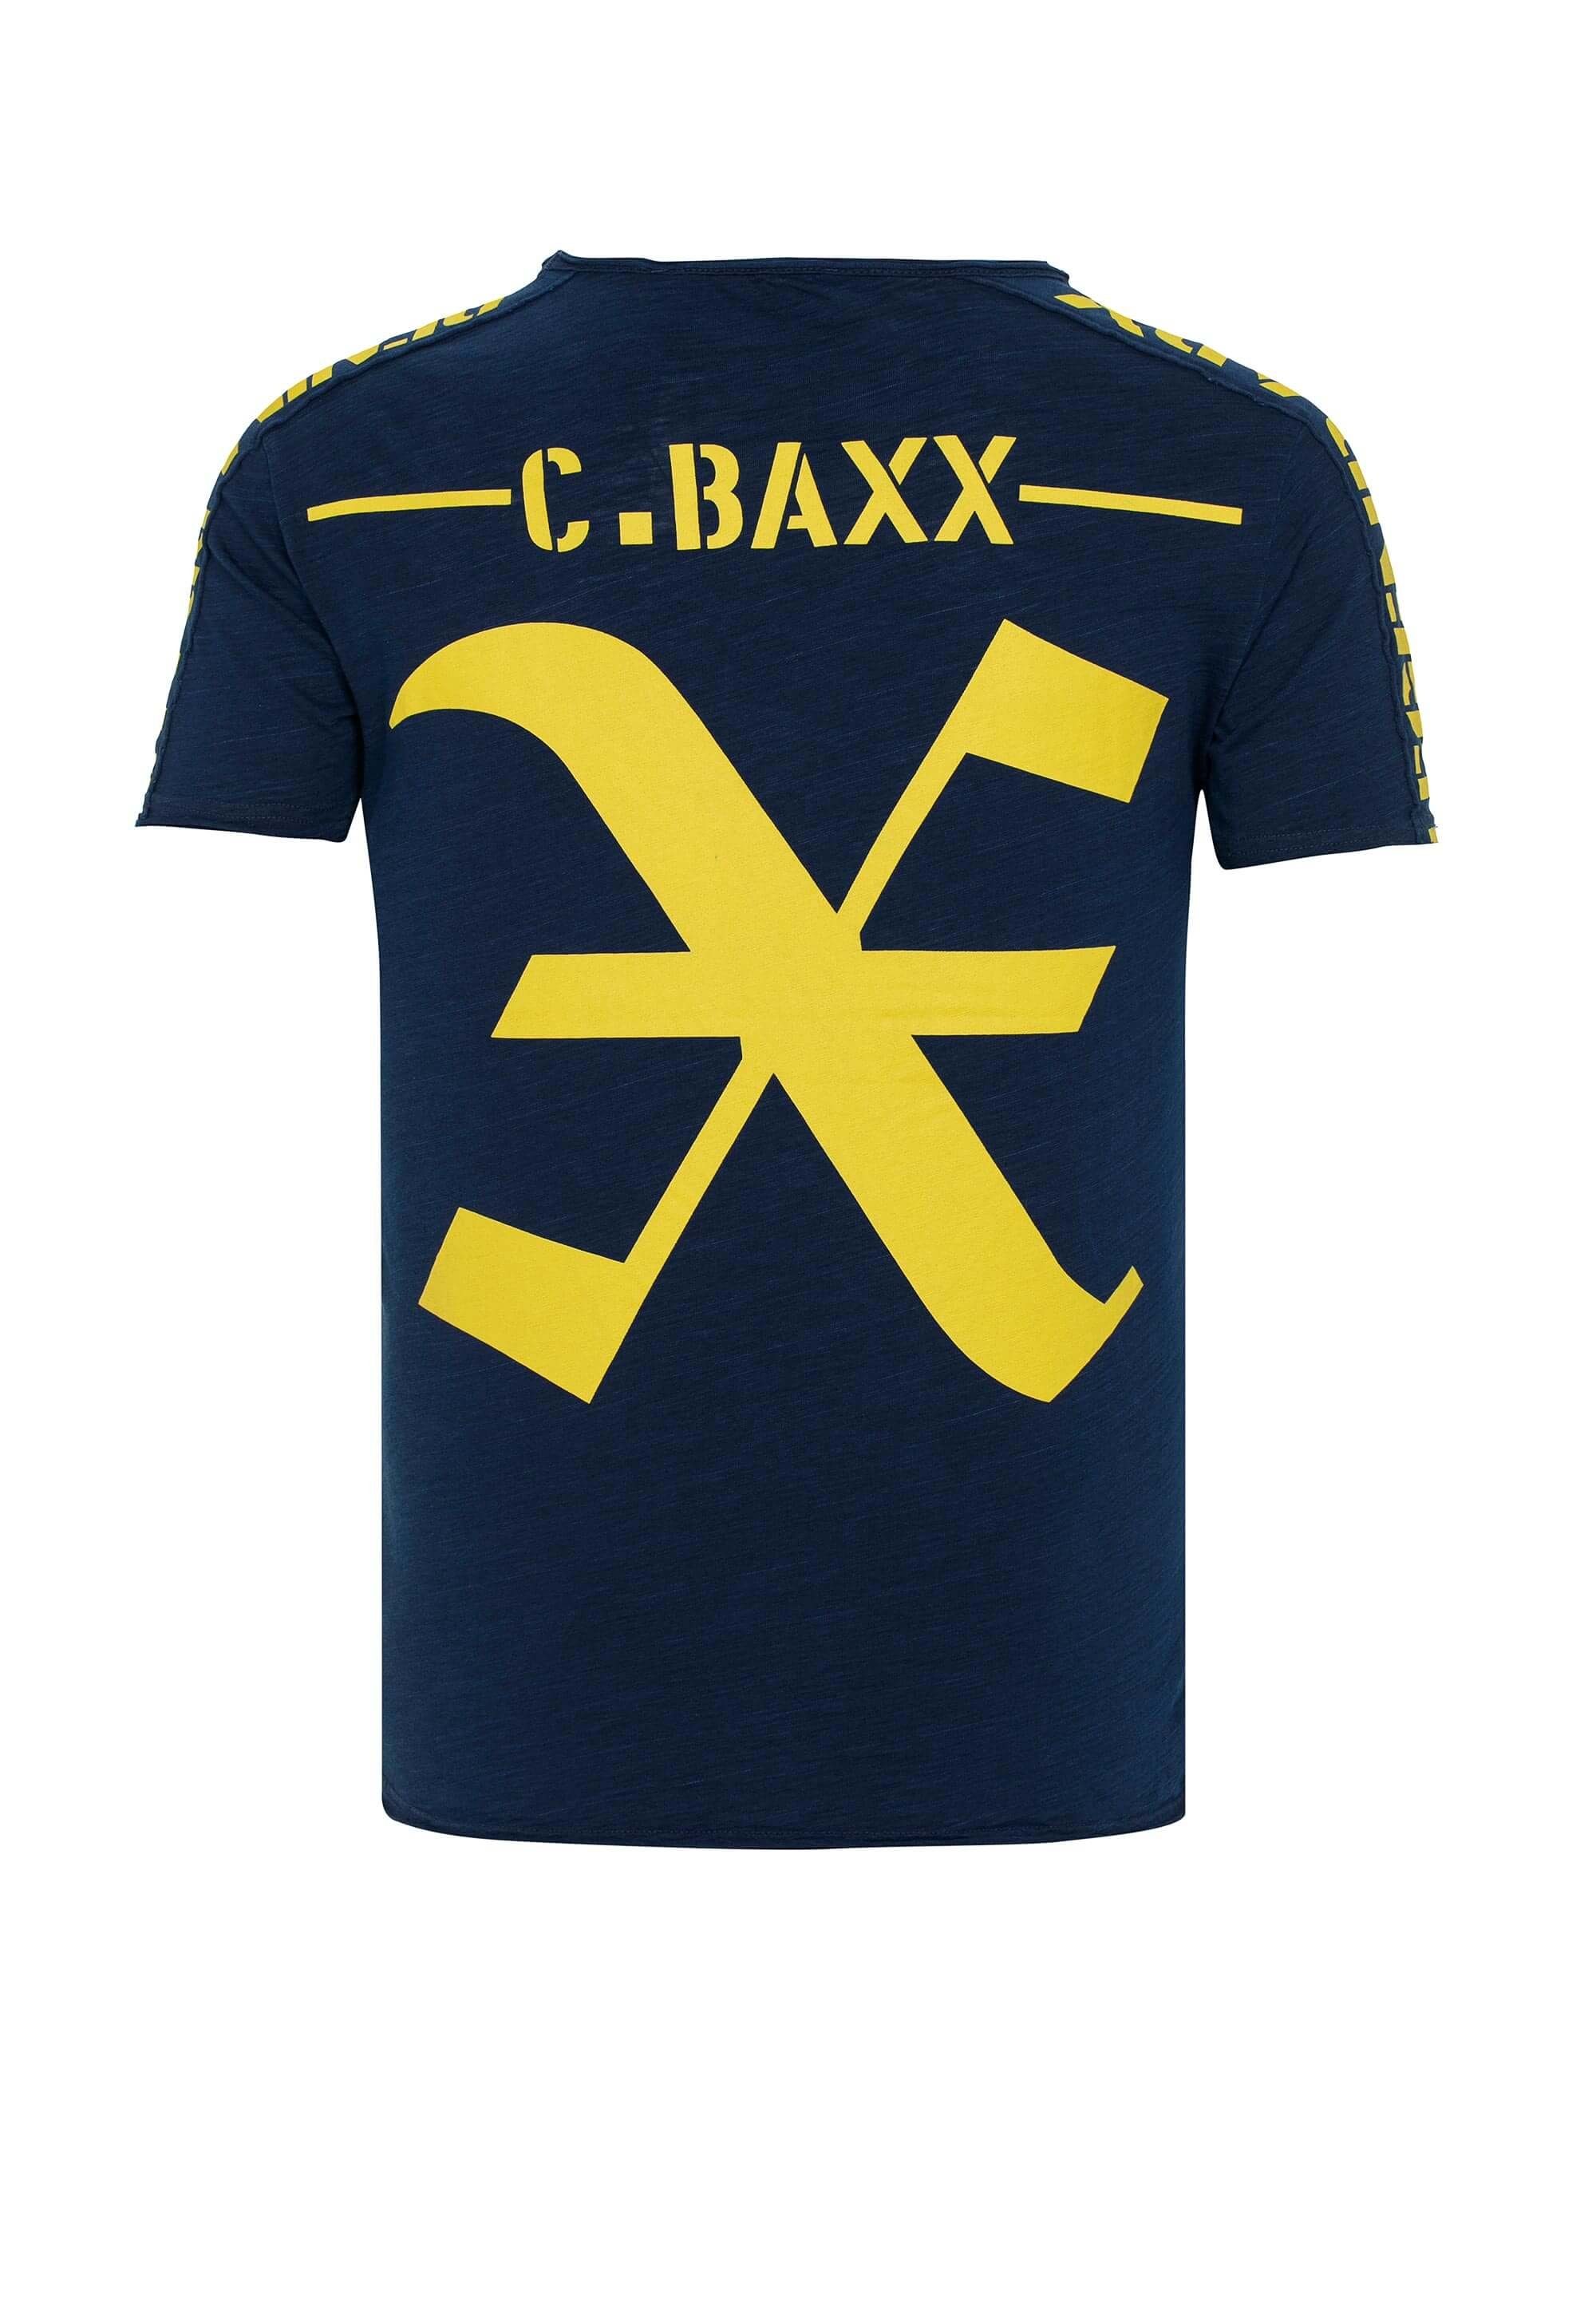 Baxx T-Shirt Relaxed-Fit im & Cipo